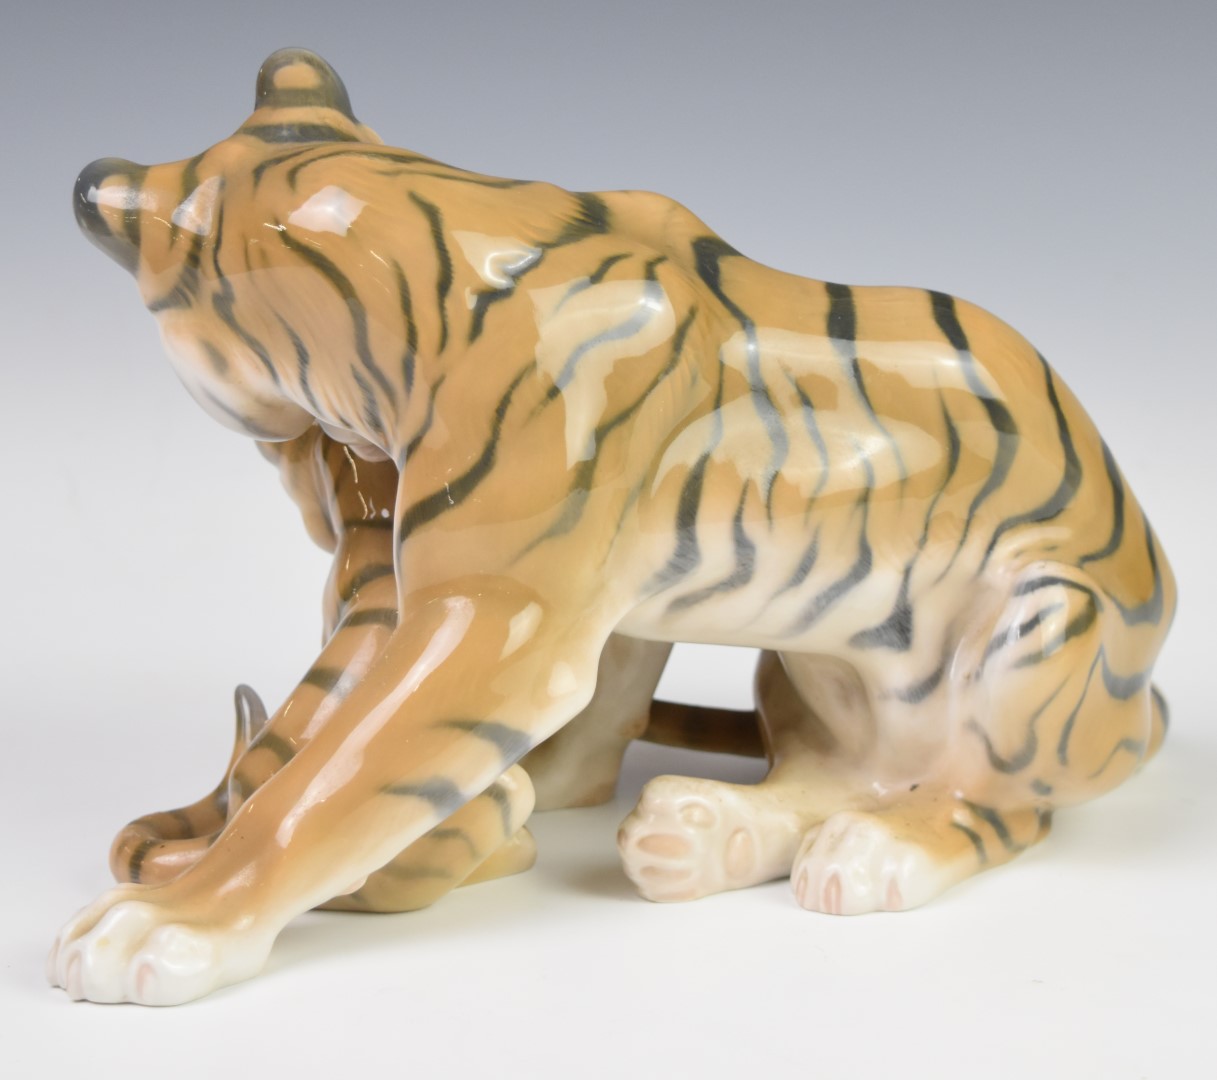 Bing & Grondahl / Copenhagen figure of a tiger with cub, height 19cm - Image 3 of 4